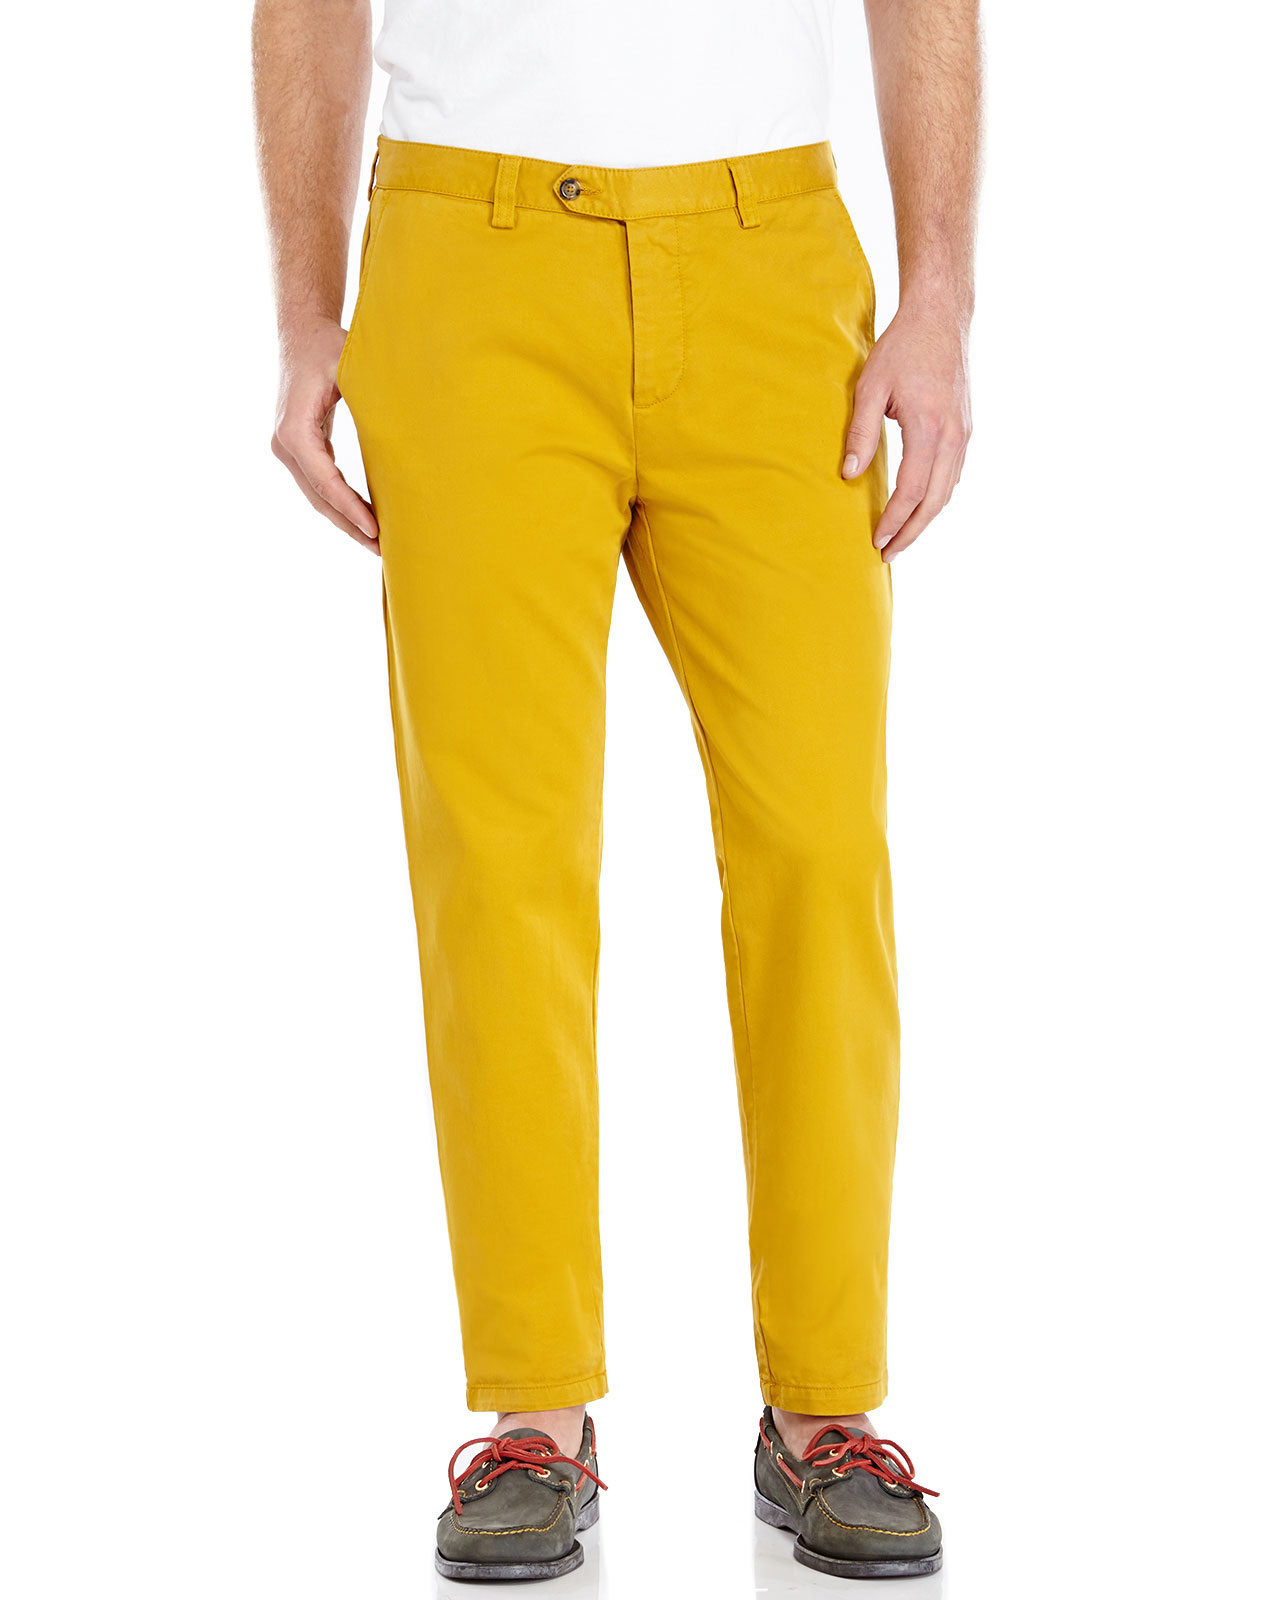 AMI Cotton Mustard Chino Pants in Yellow for Men - Lyst